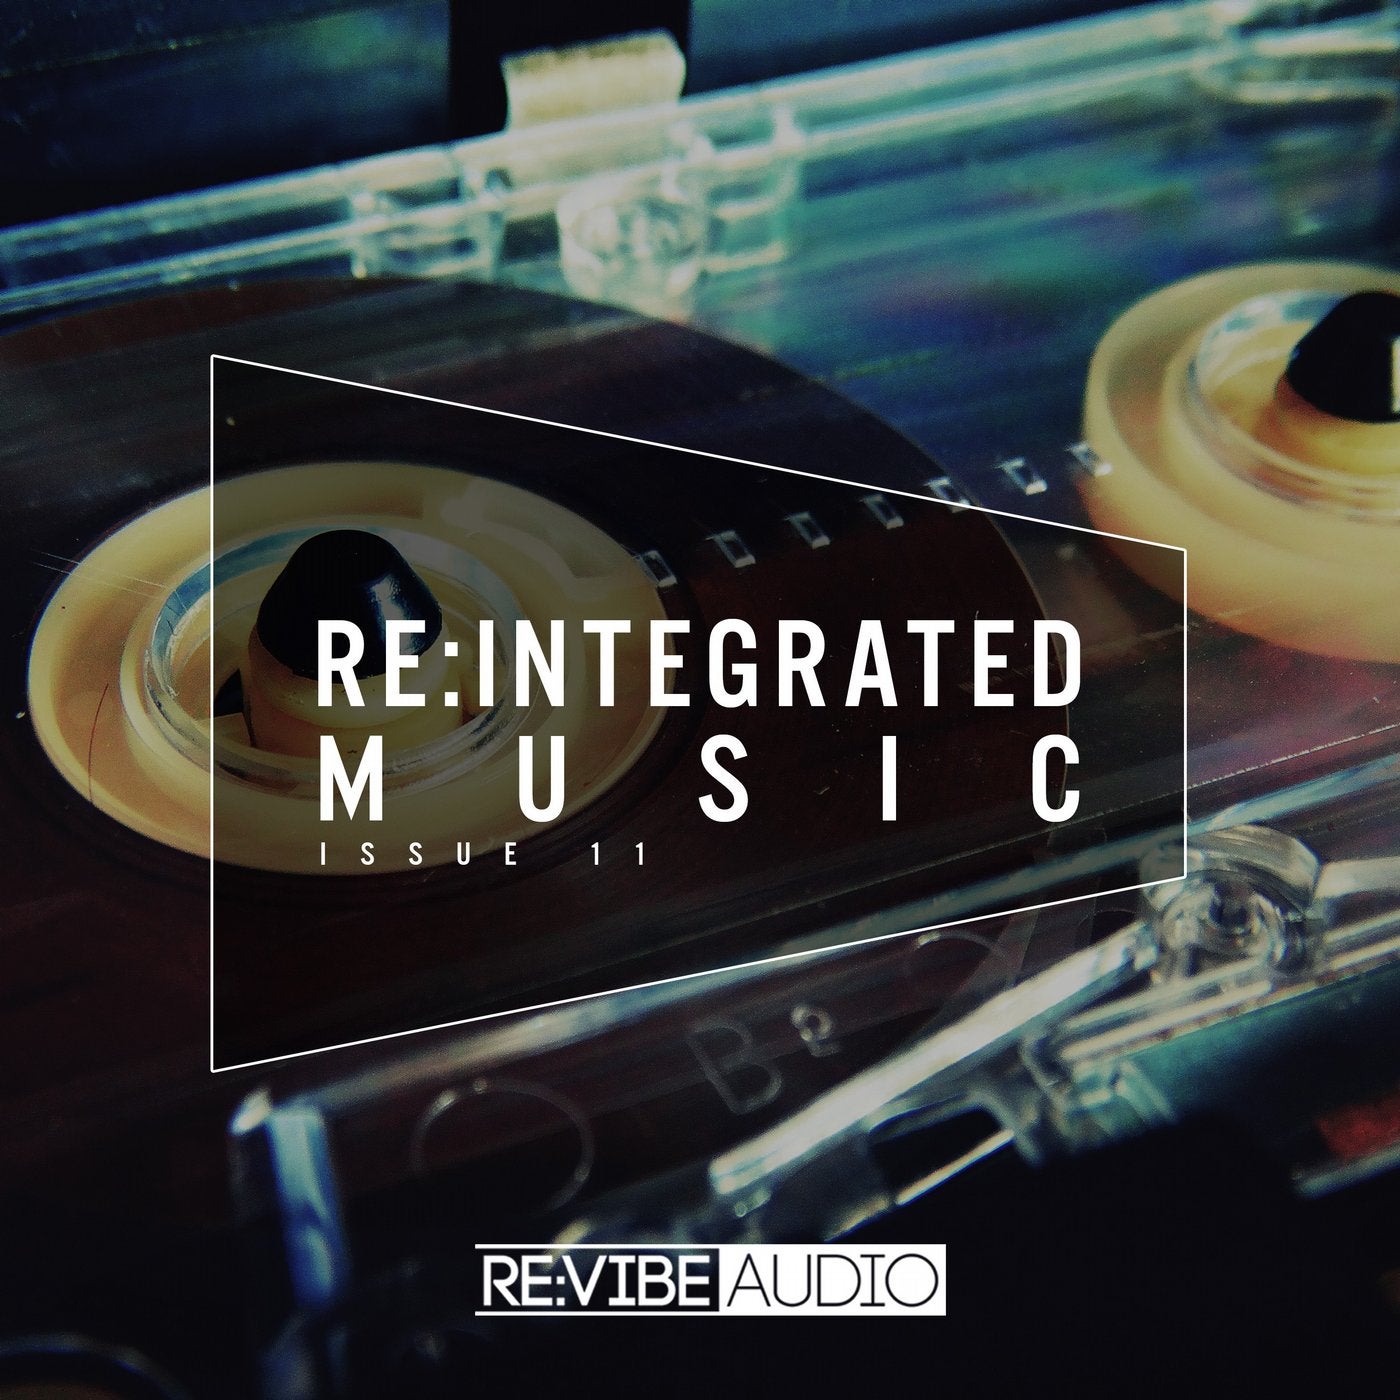 Re:Integrated Music Issue 11